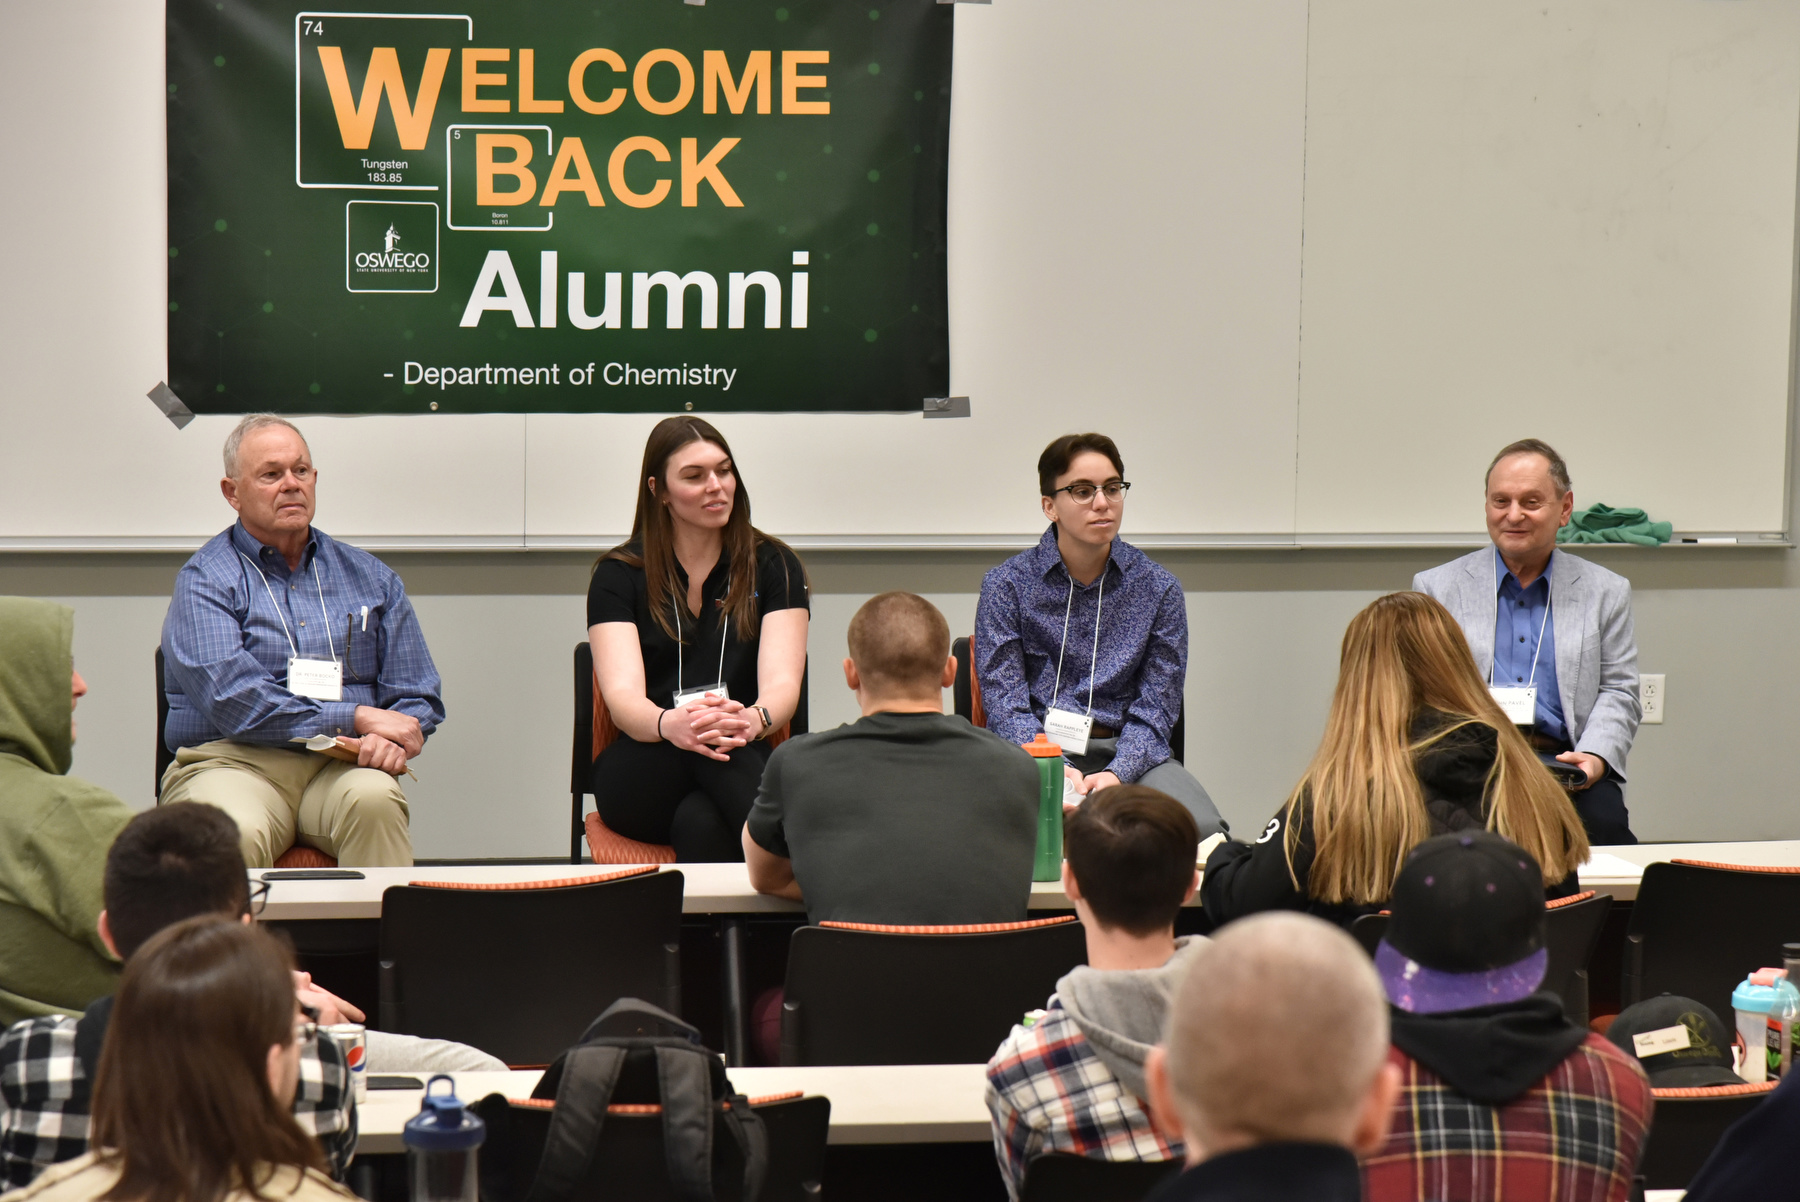 Chemistry alumni visited campus April 24 to talk with current students. From left is Peter Bocko '73, retired chief technology officer, Corning Incorporated; Morgan Wolanin '20, technical service engineer, MacDermid Alpha Electronics Solutions; Sarah Rappleye '20, lab technician, Eastman Kodak Company; and John Pavel '72 M'05, retired supervisor, Nine Mile Point Nuclear Station.